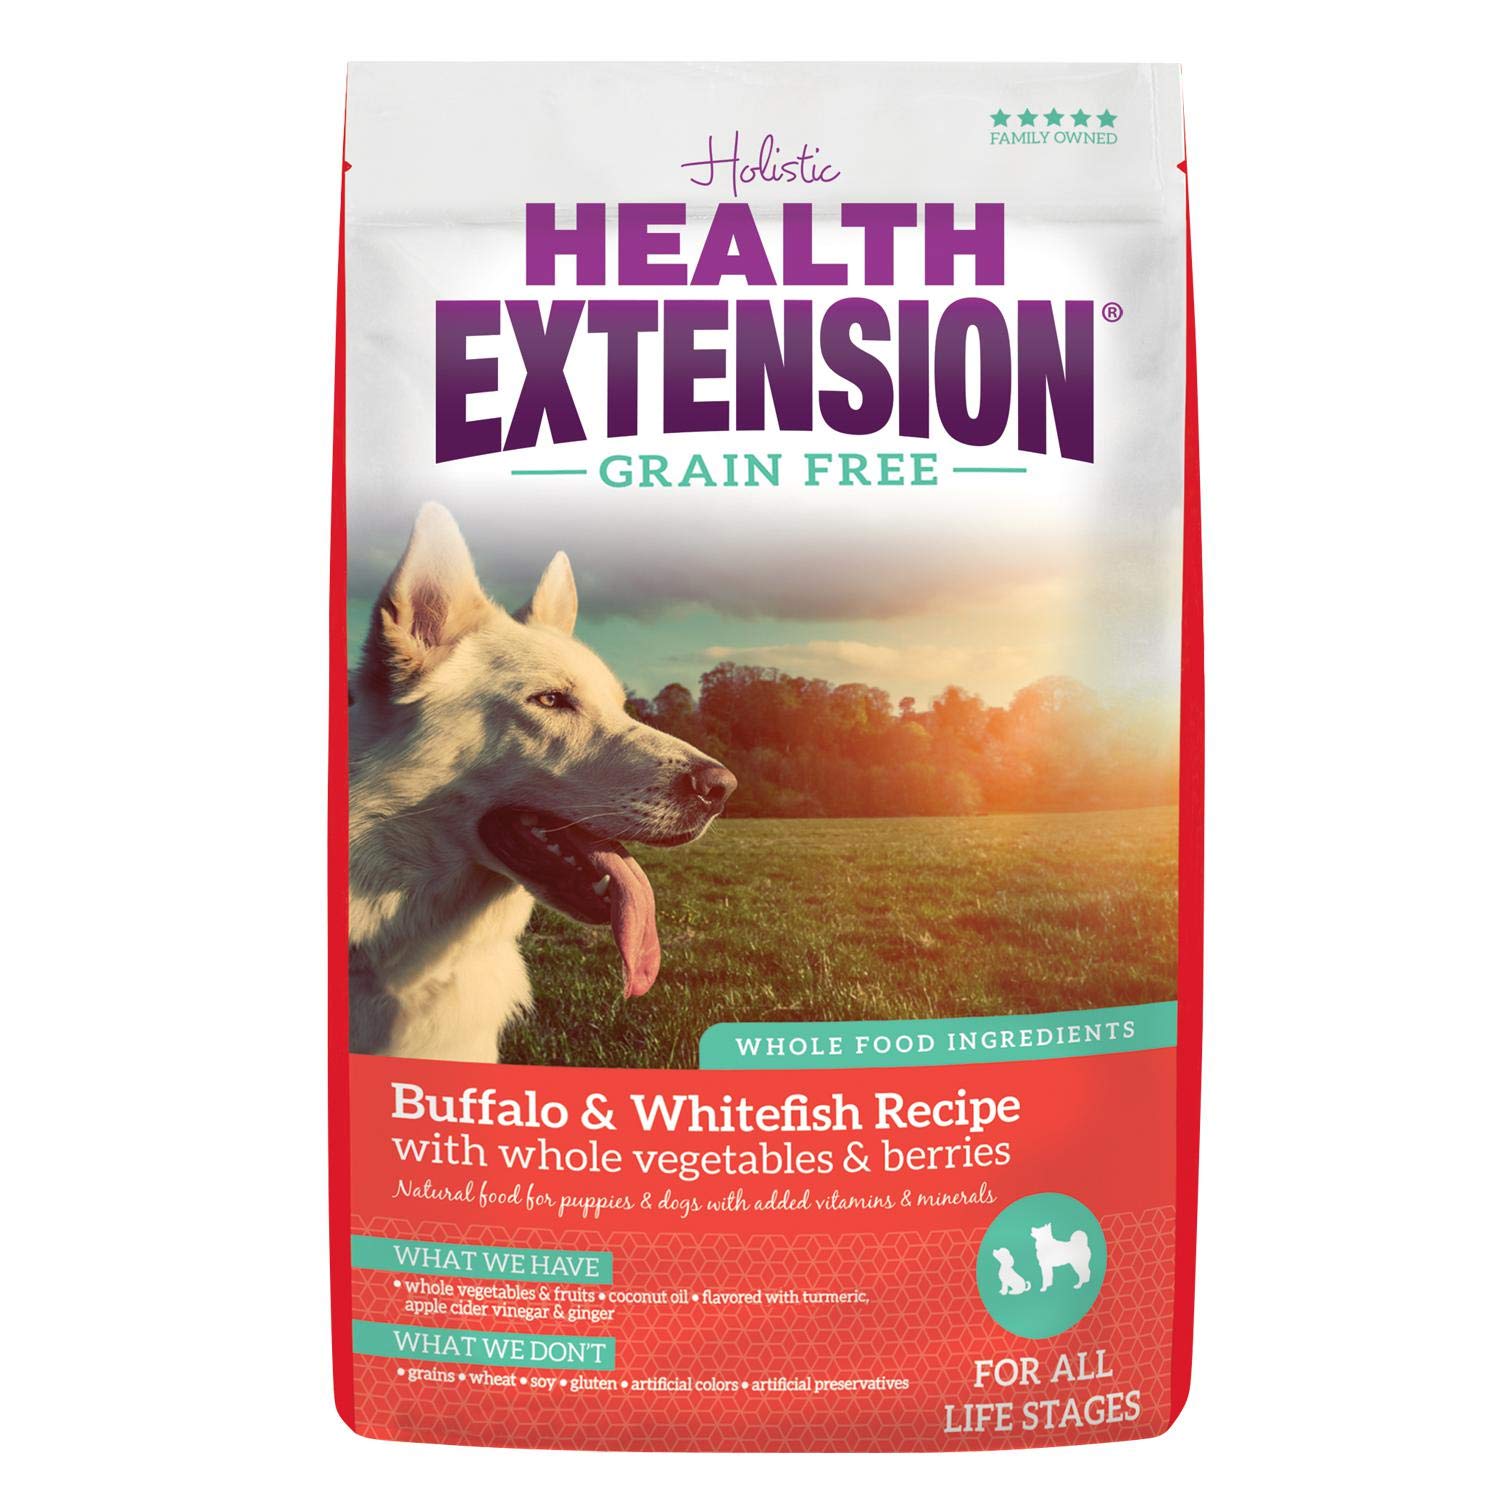 Health extension 